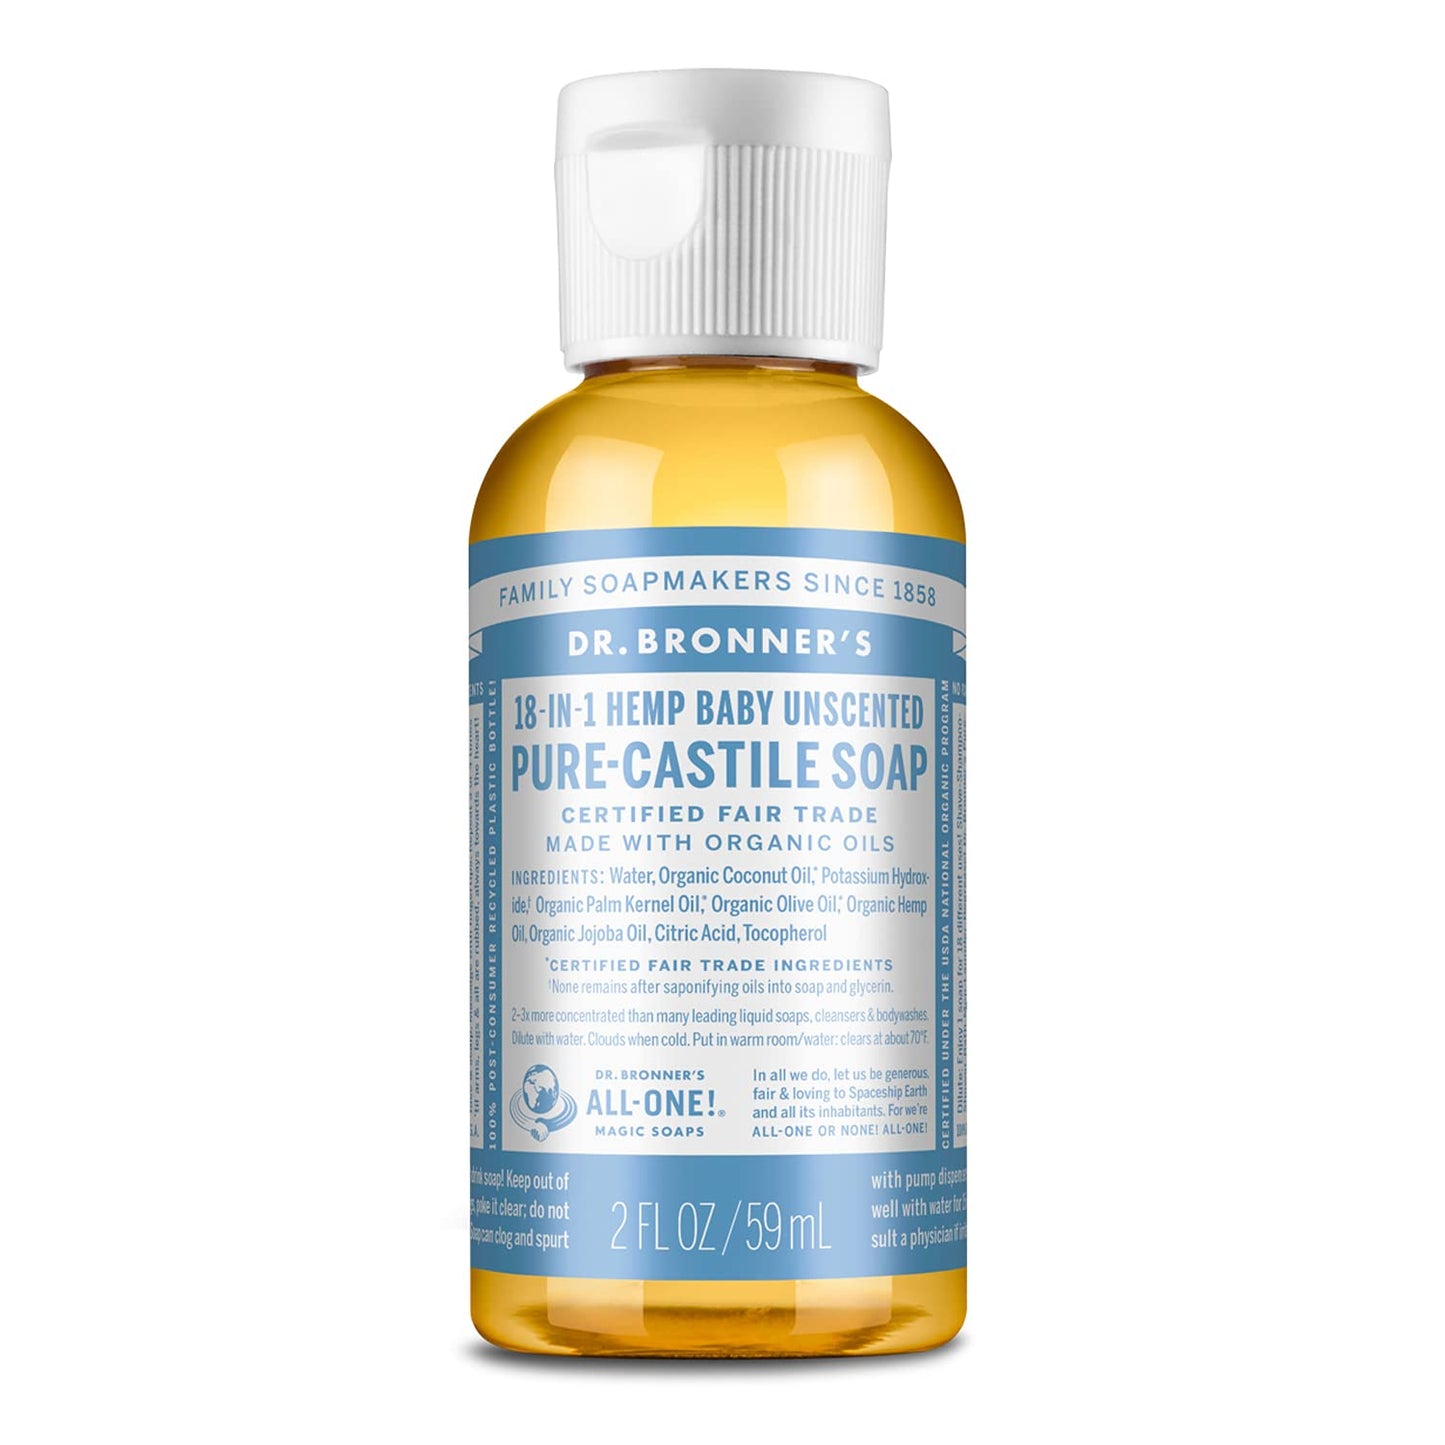 Dr. Bronner's Magic Soap Unscented